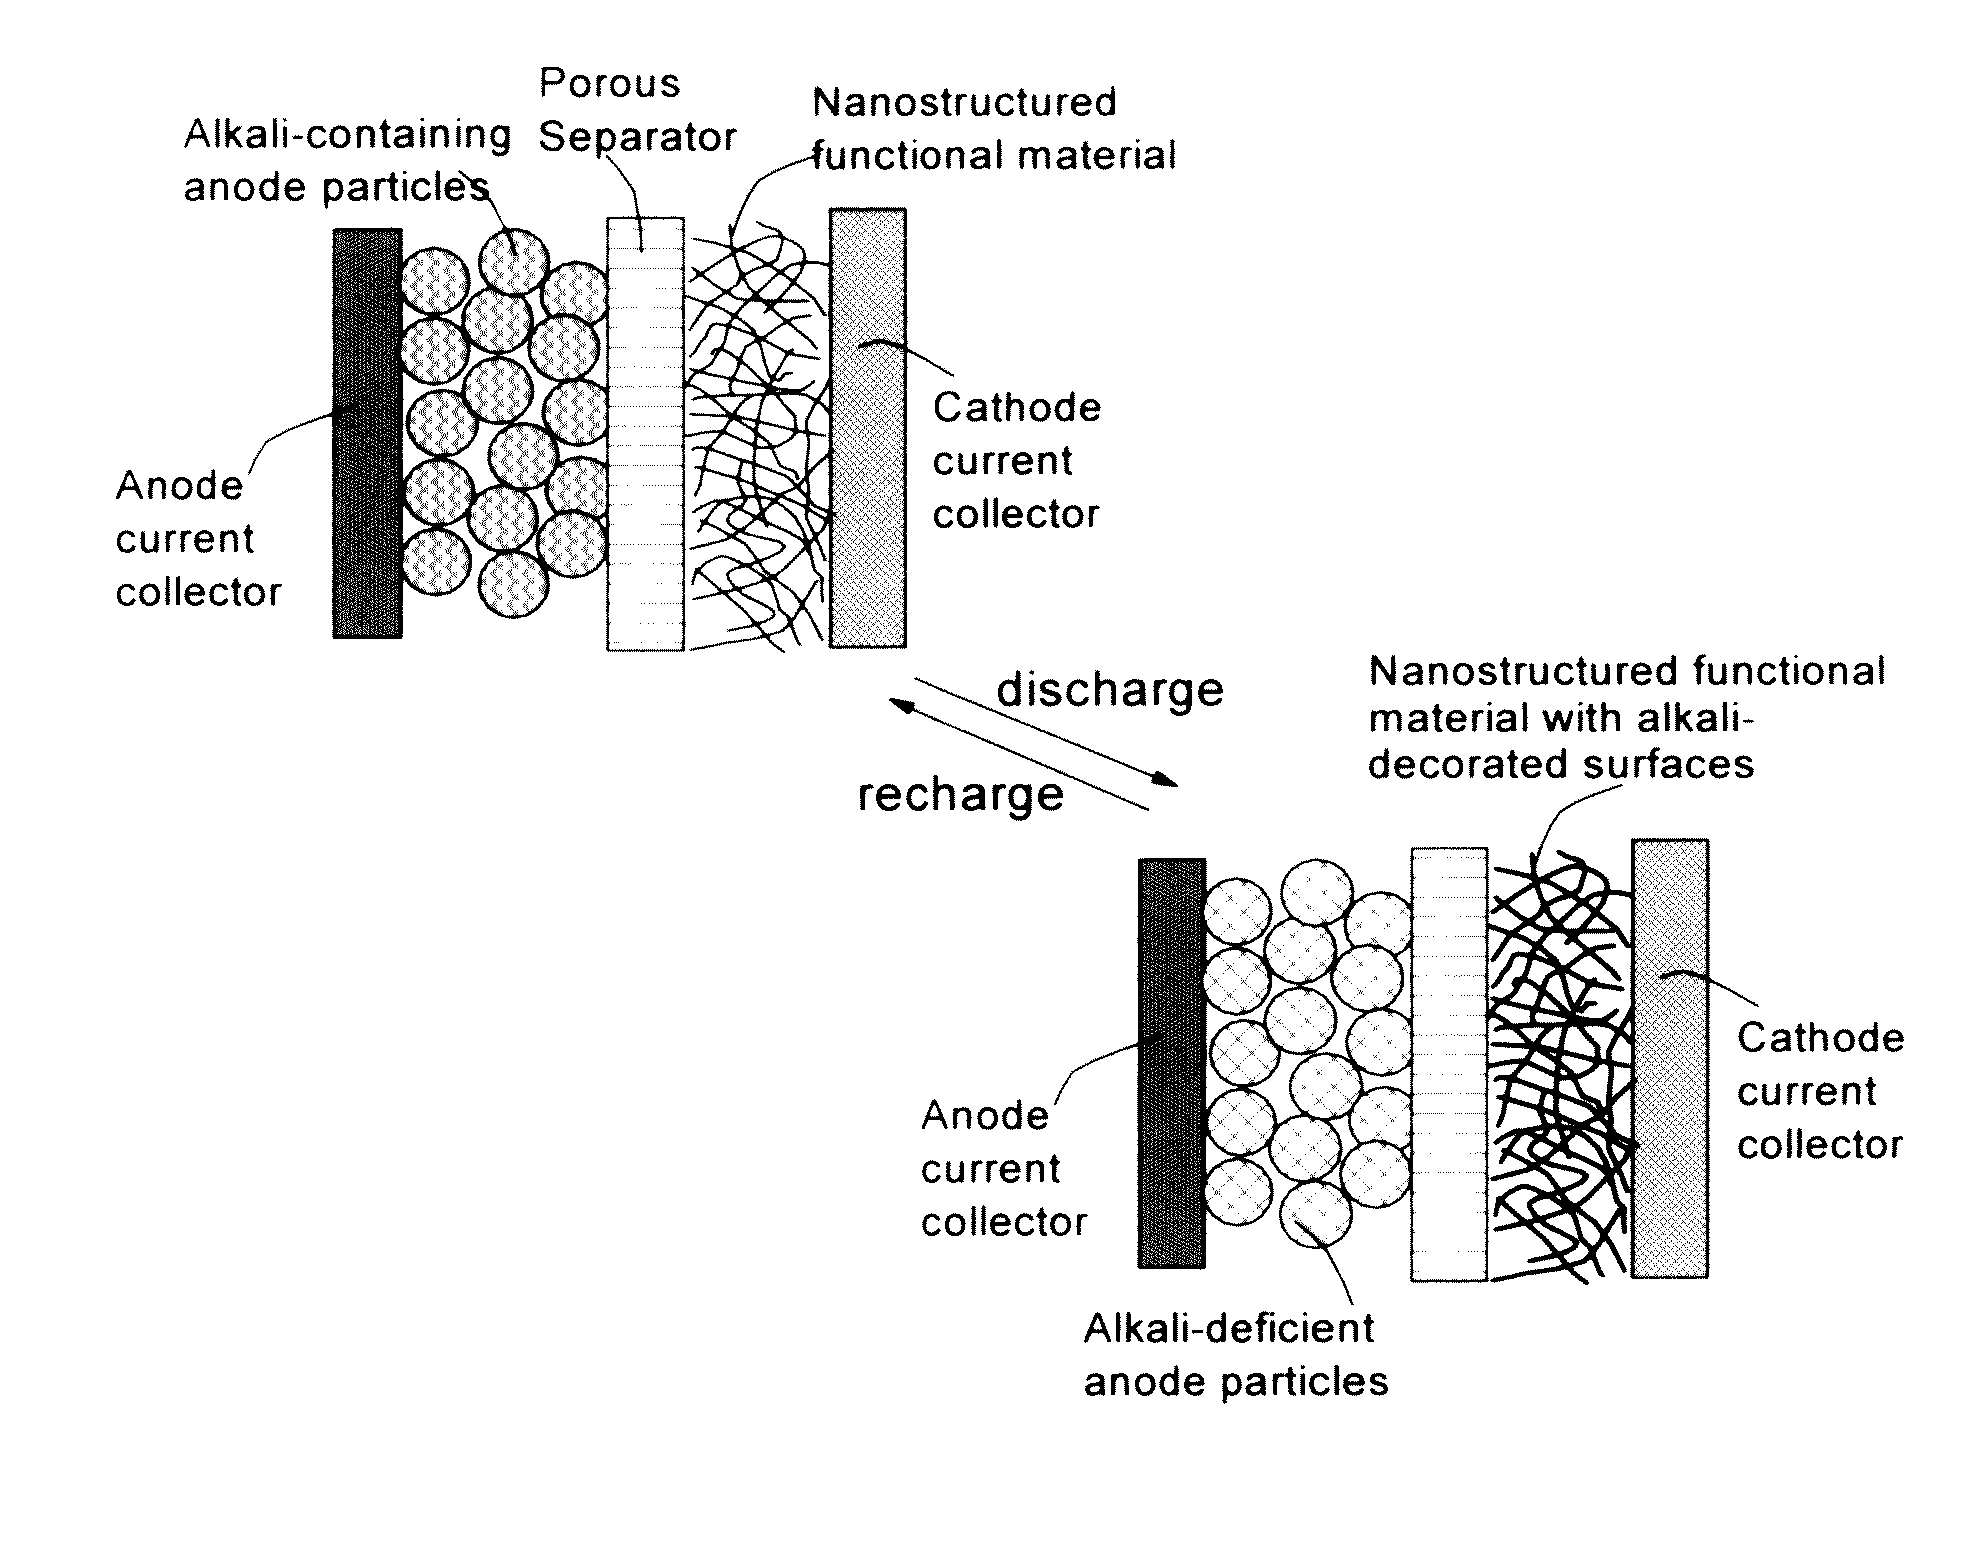 Partially and fully surface-enable metal ion-exchanging energy storage devices